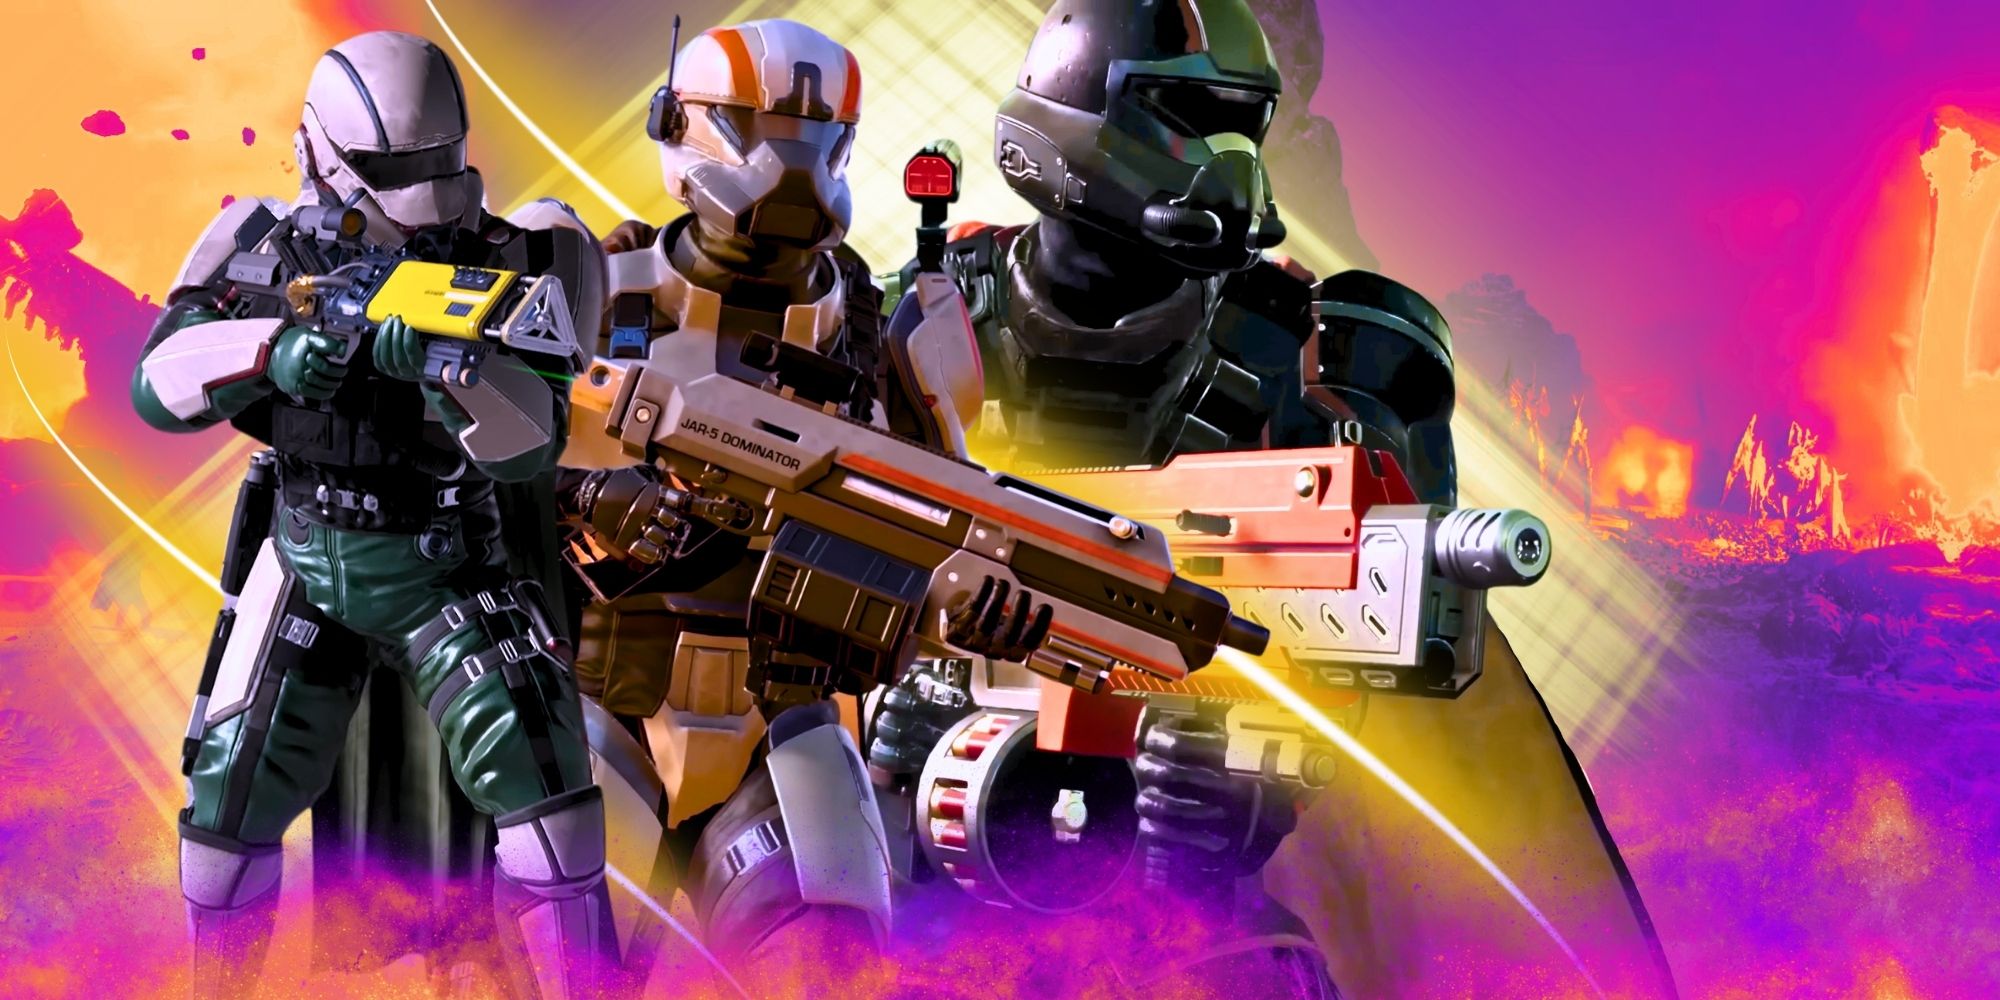 Three soldiers in Helldivers 2 brandishing guns on an orange and purple background.